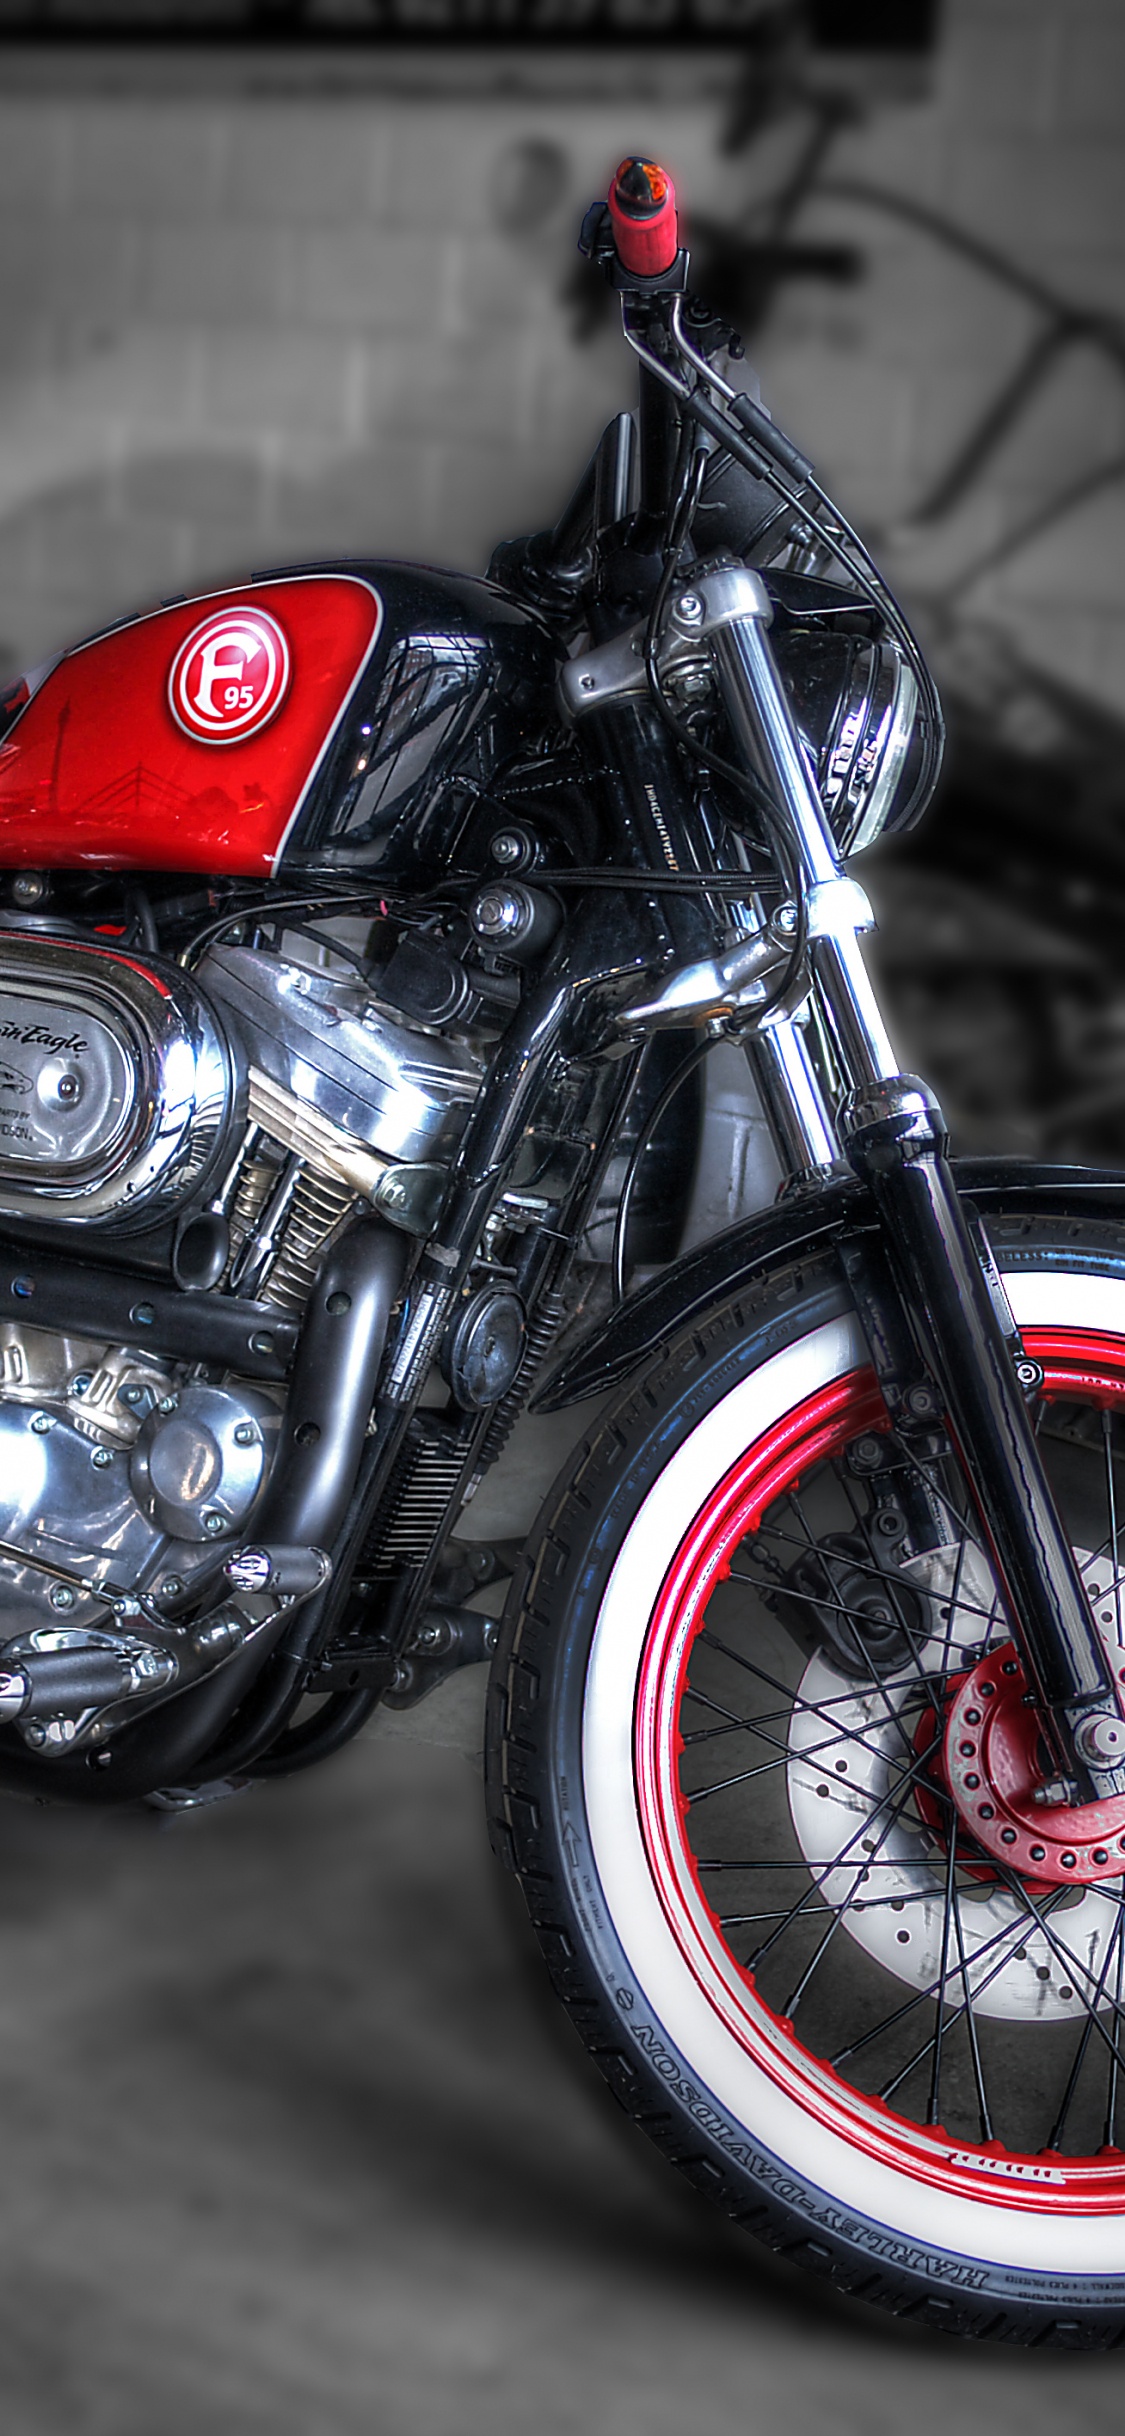 Red and Black Cruiser Motorcycle. Wallpaper in 1125x2436 Resolution